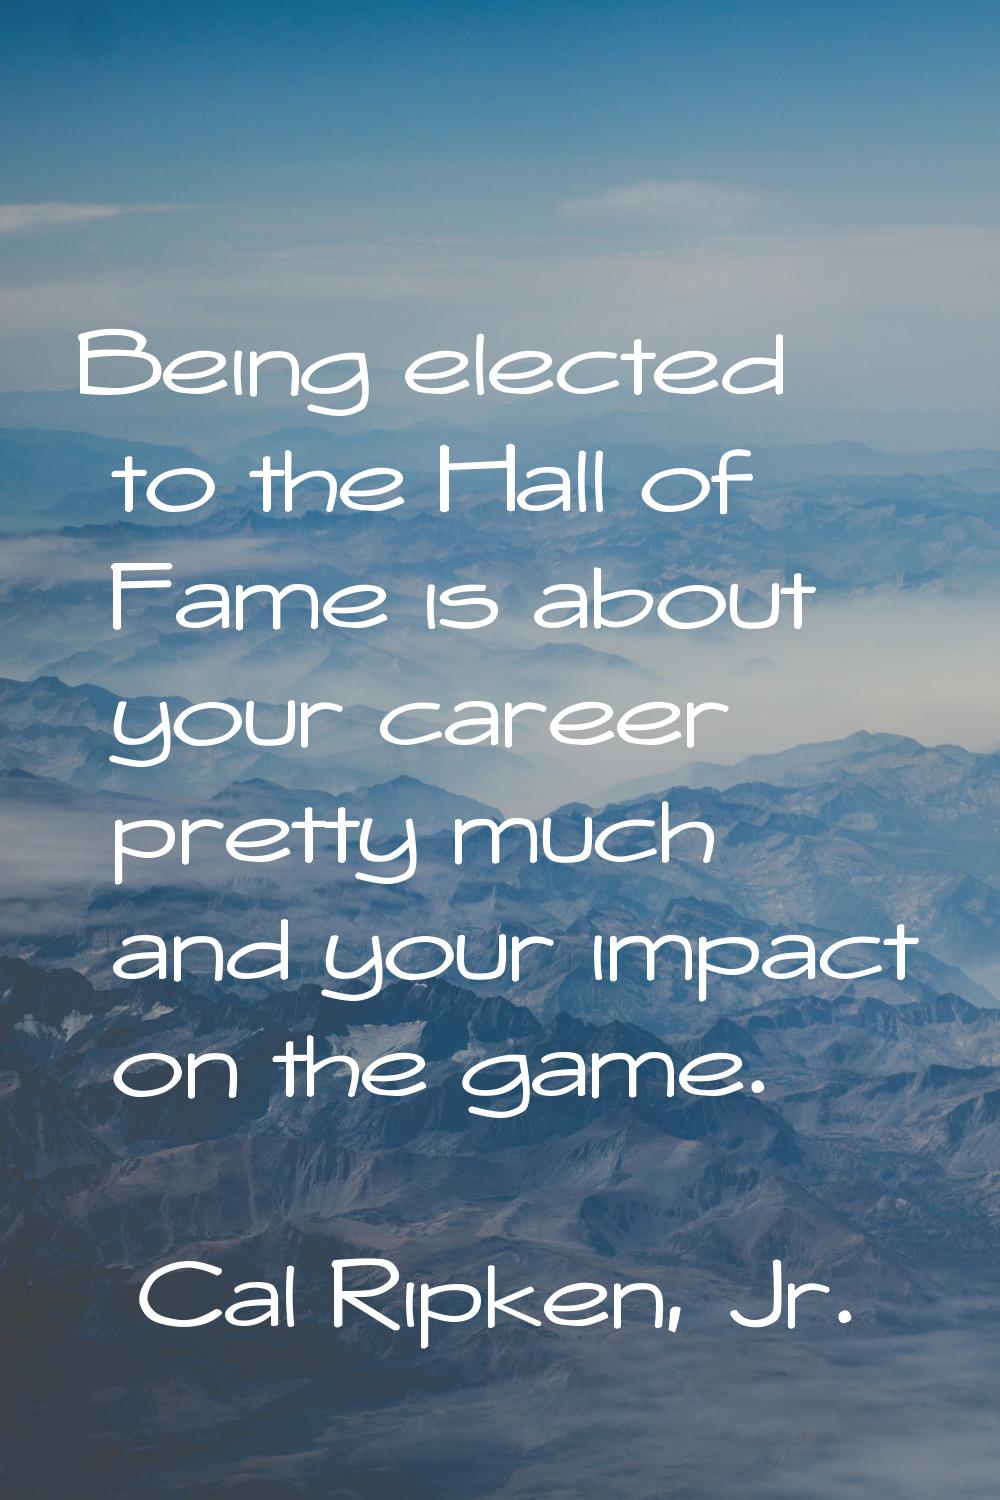 Being elected to the Hall of Fame is about your career pretty much and your impact on the game.